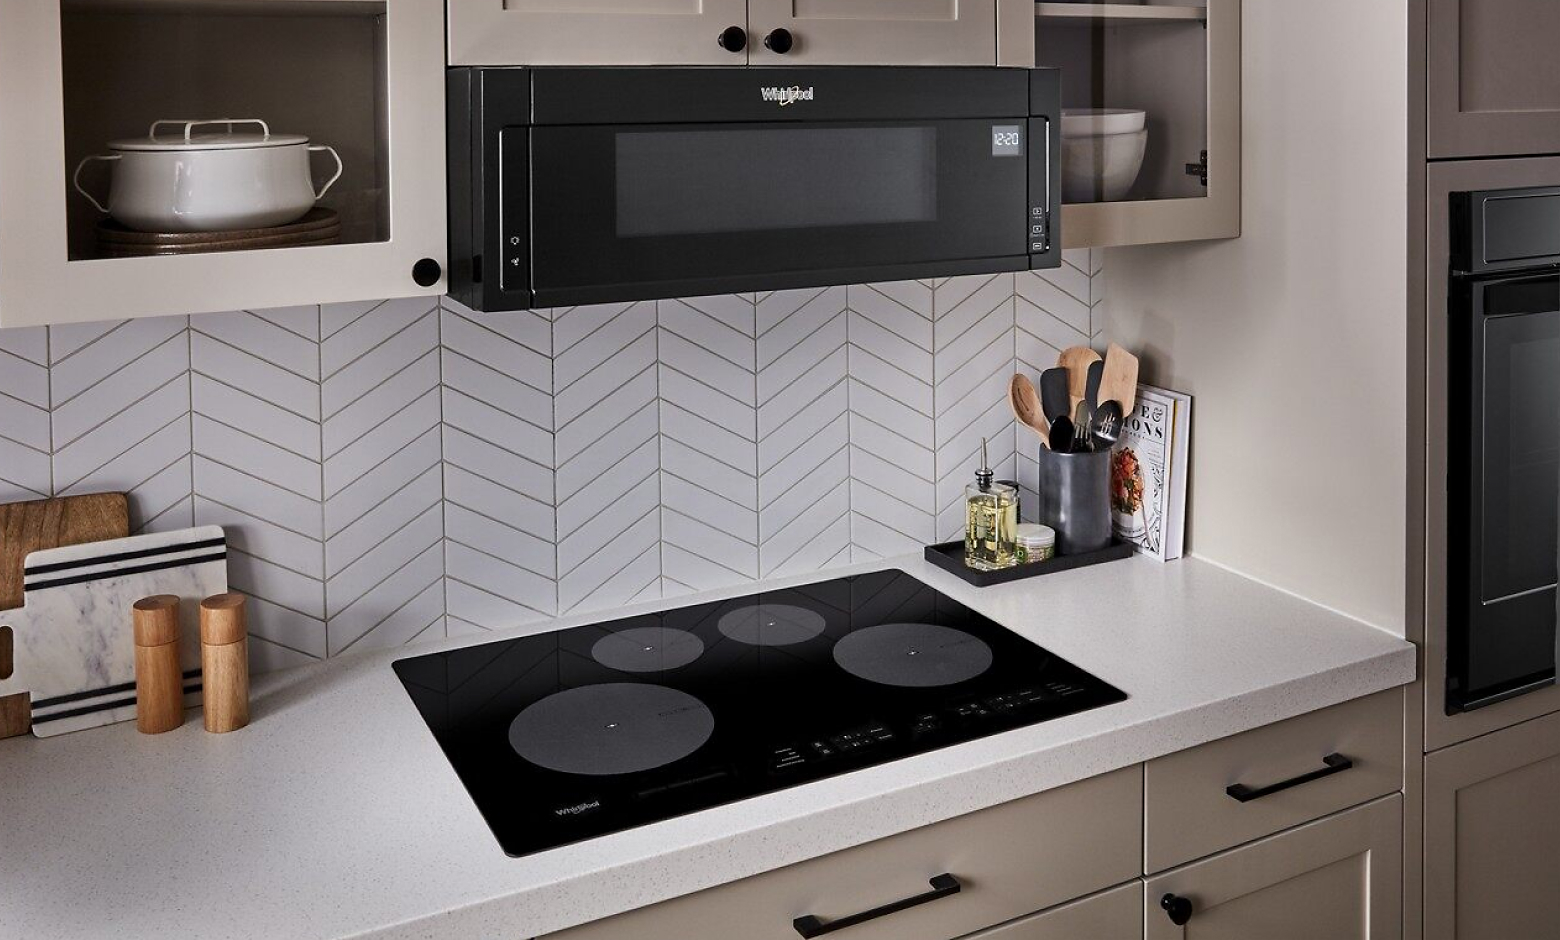 How to Install a Cooktop